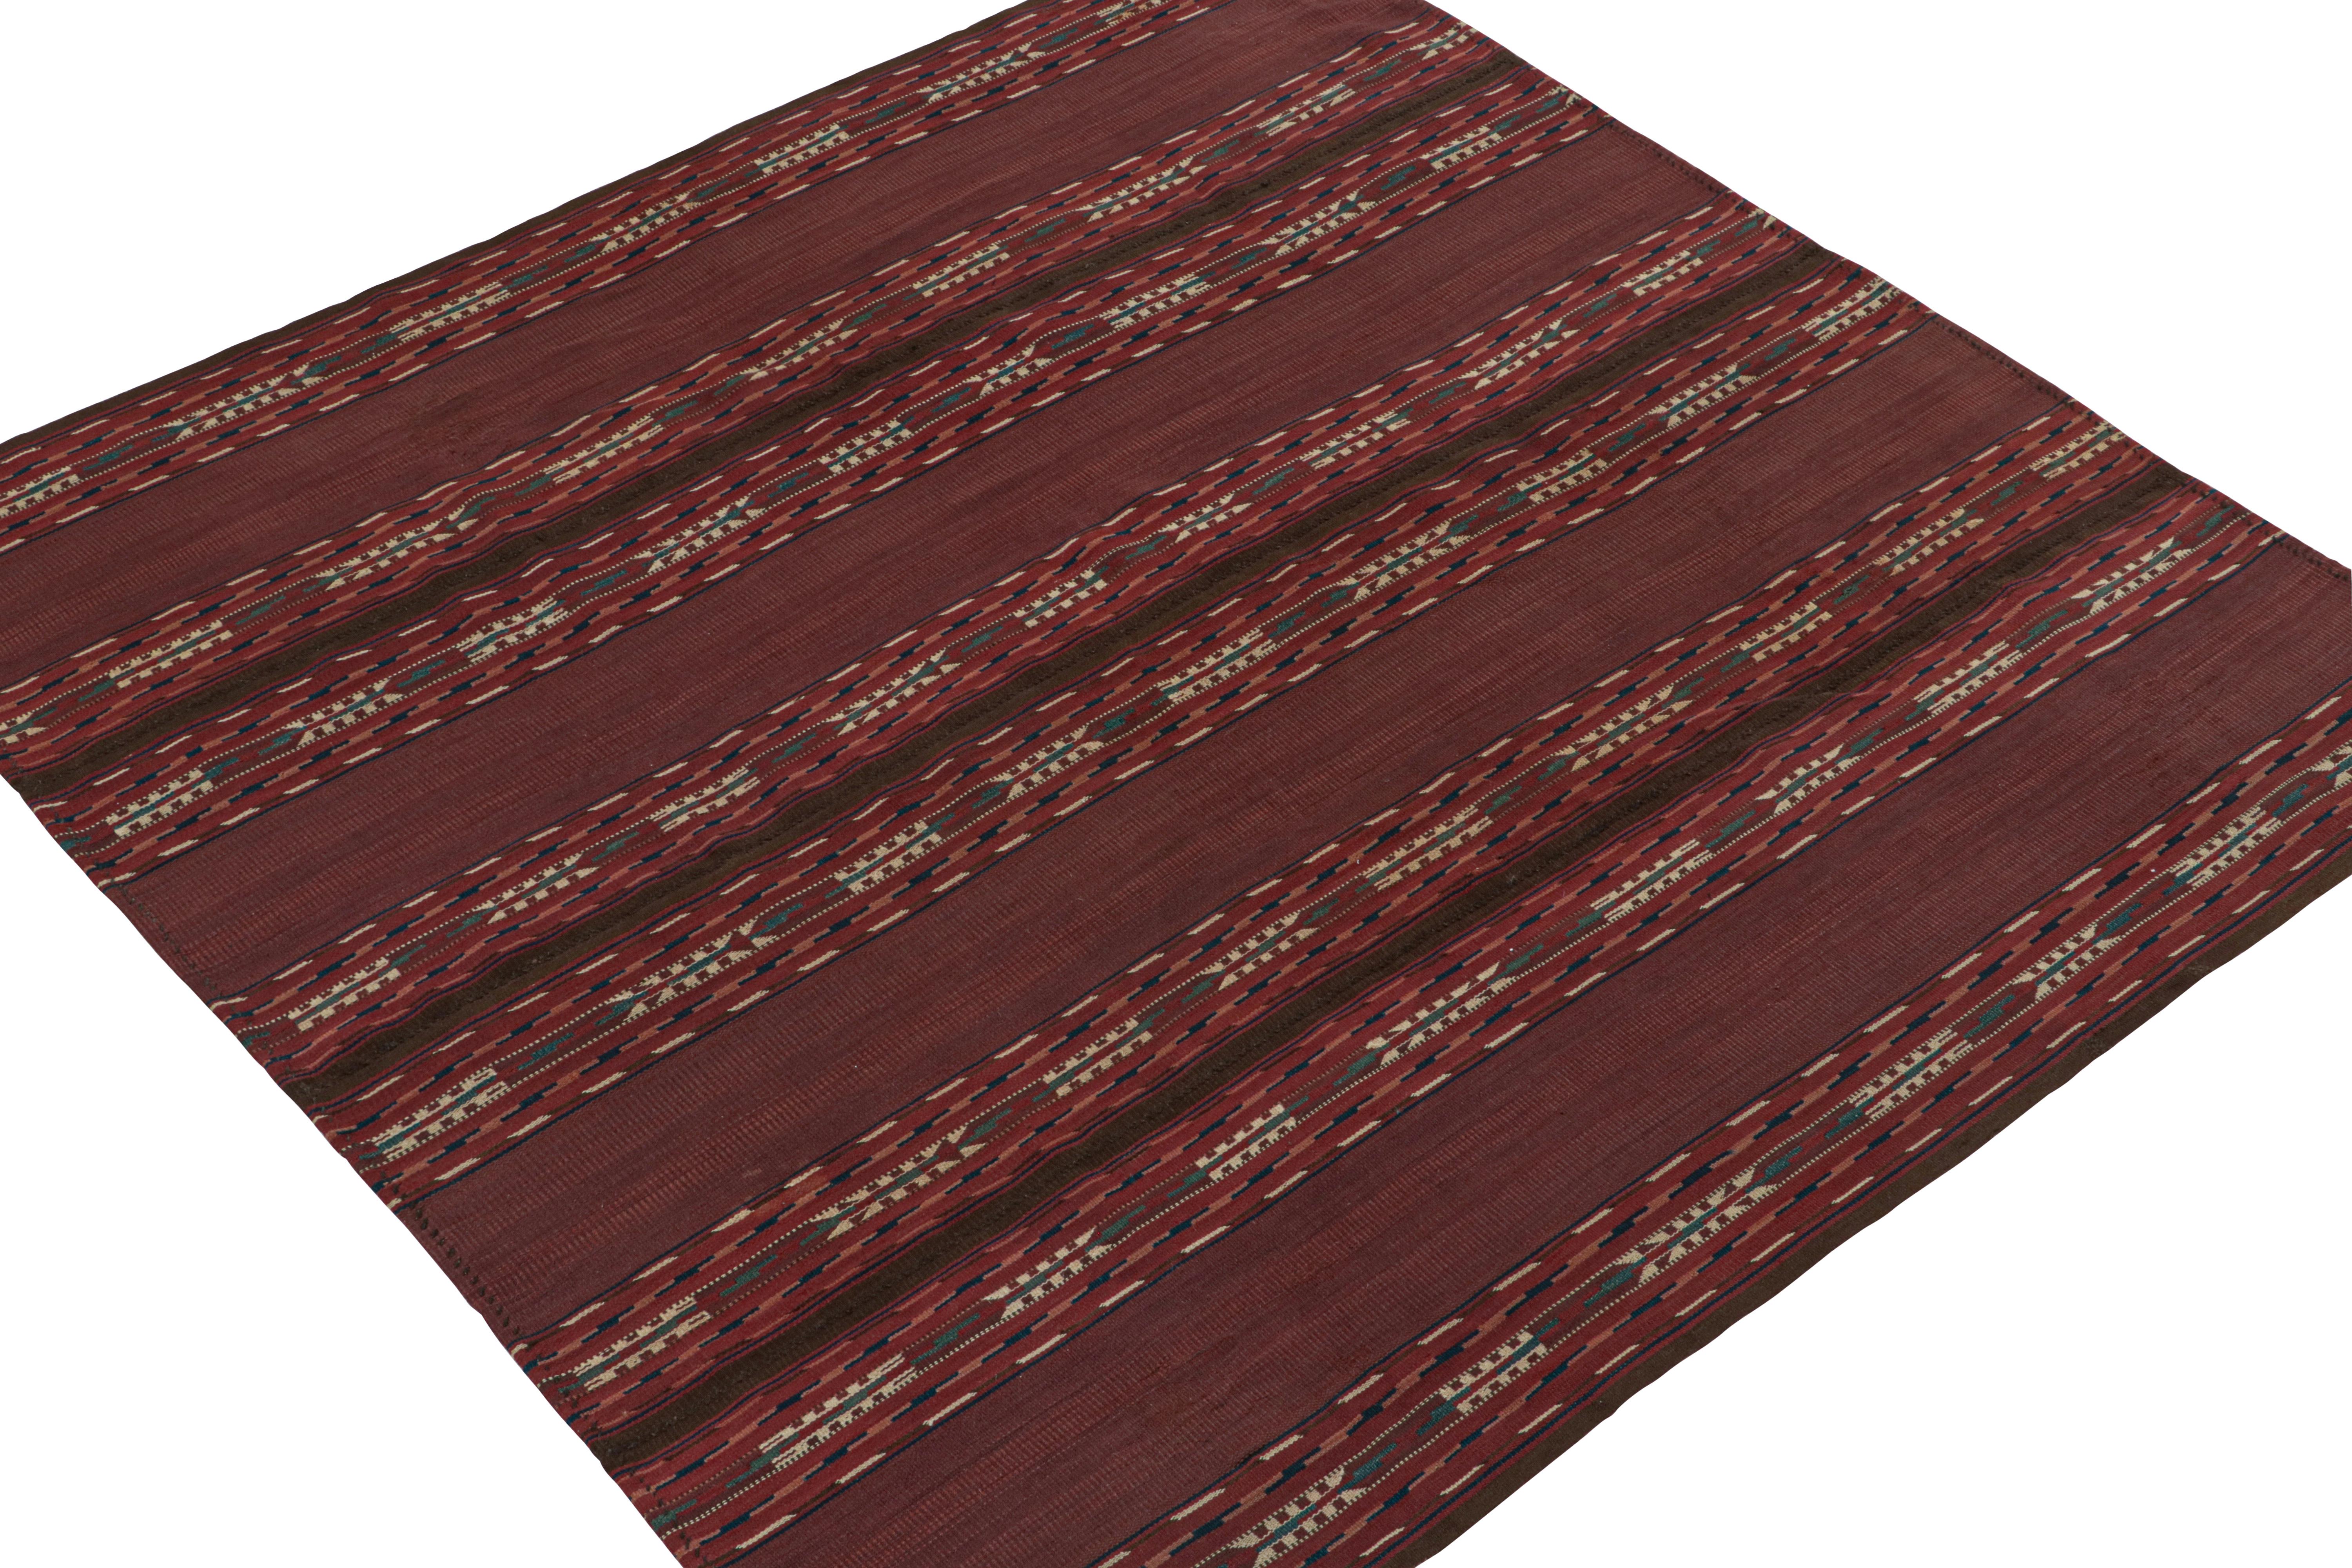 Tribal Vintage Persian Kilim in Burgundy Stripes with Geometric Patterns For Sale